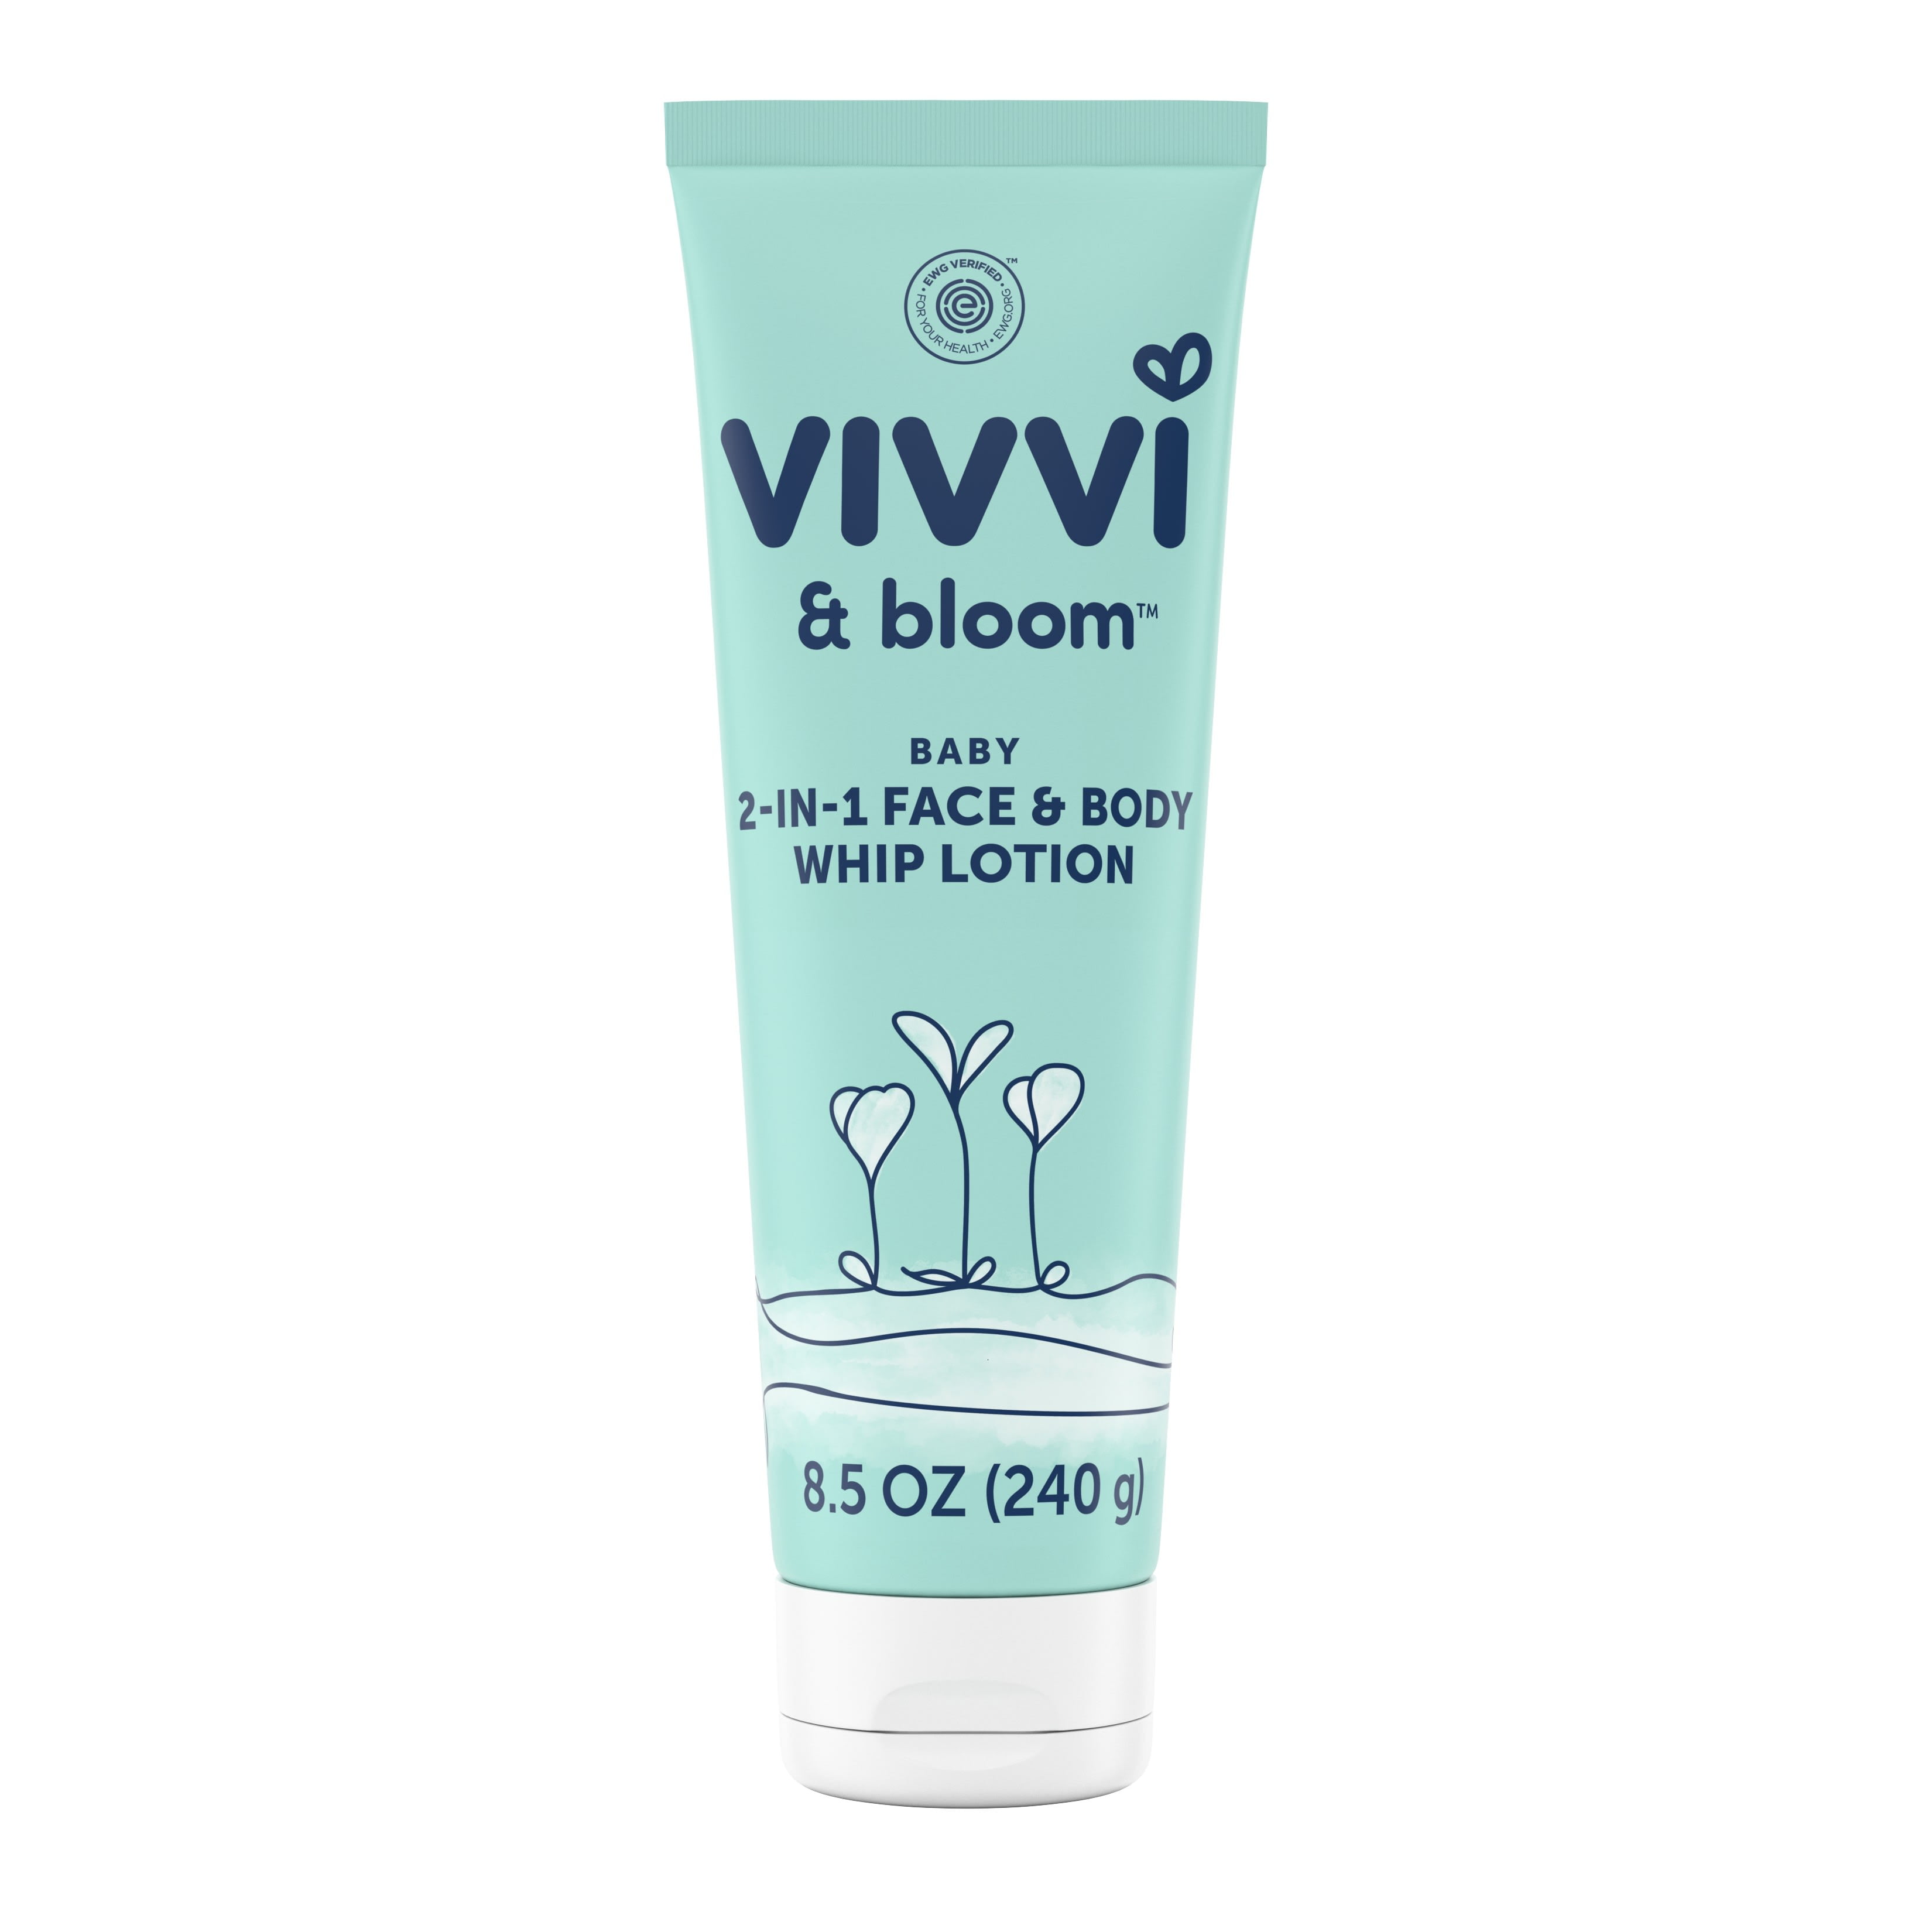 Vivvi & Bloom Gentle 2-in-1 Baby Face & Body Whip Lotion, 8.5 Oz